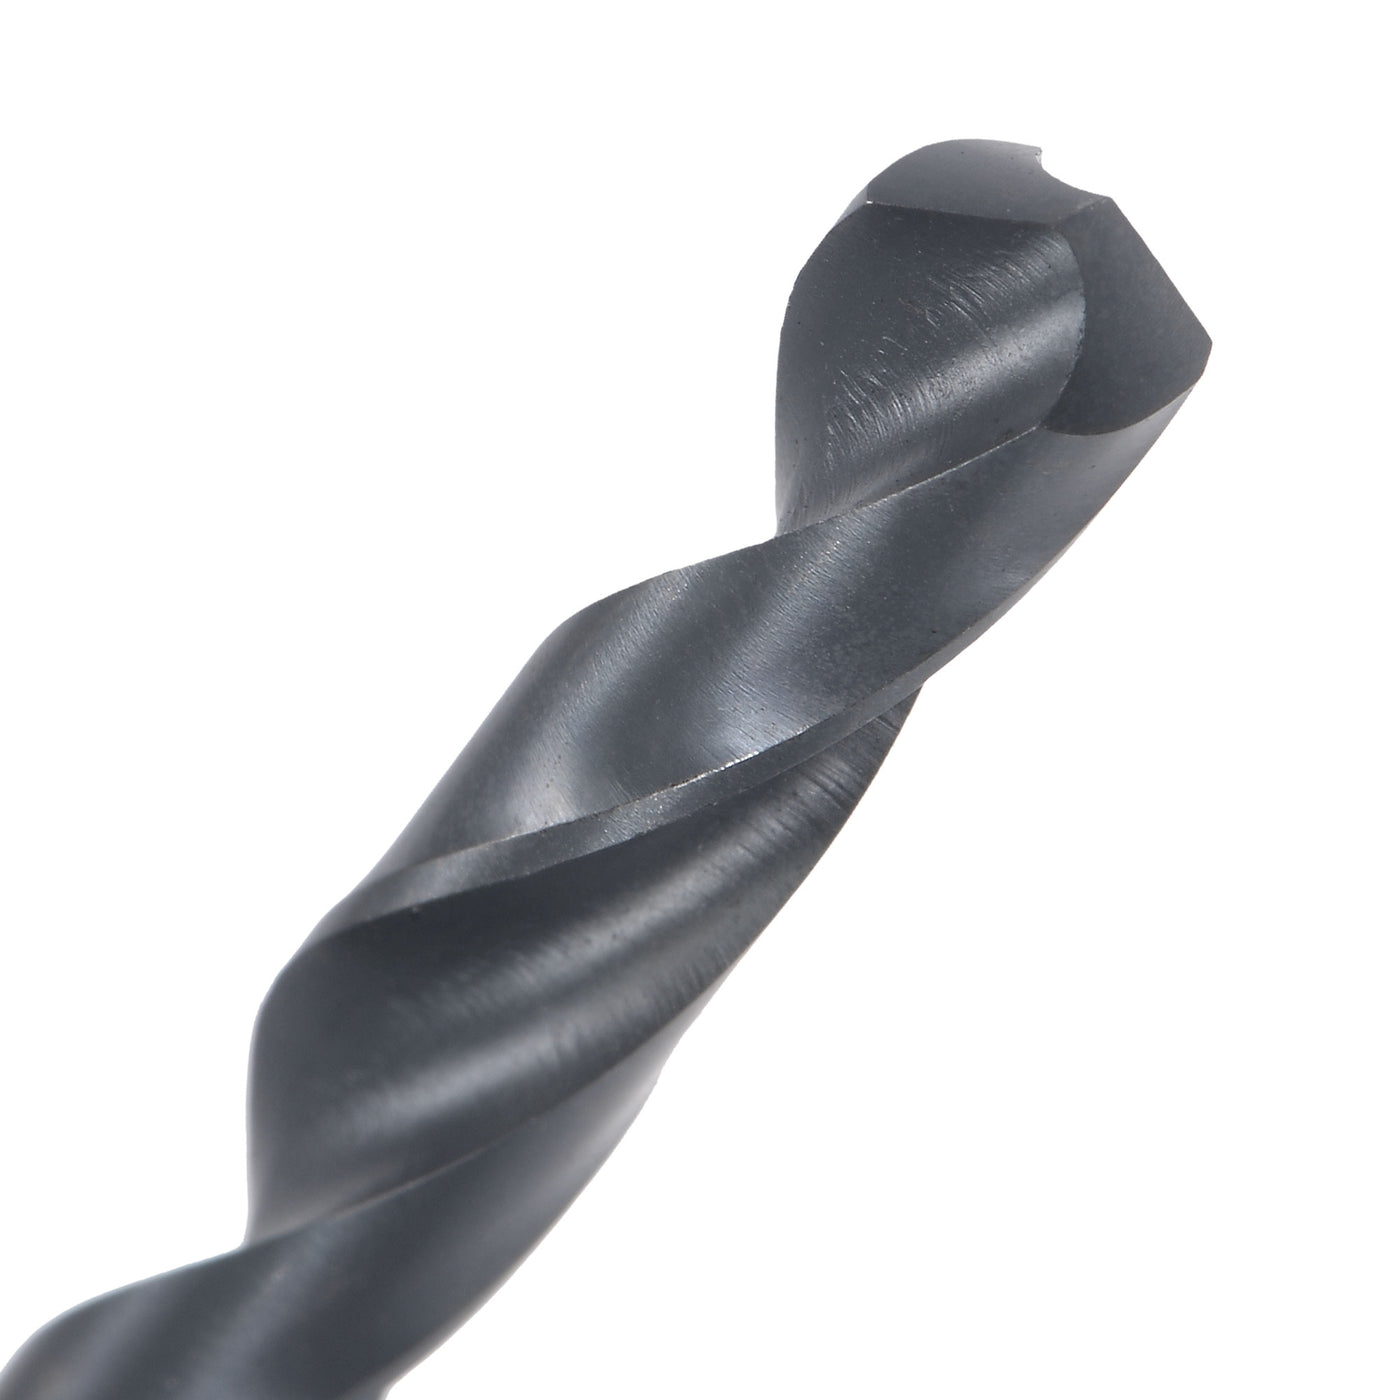 uxcell Uxcell High Speed Steel Lengthen Twist Drill Bit 5.8mm Fully Ground Black Oxide 2Pcs